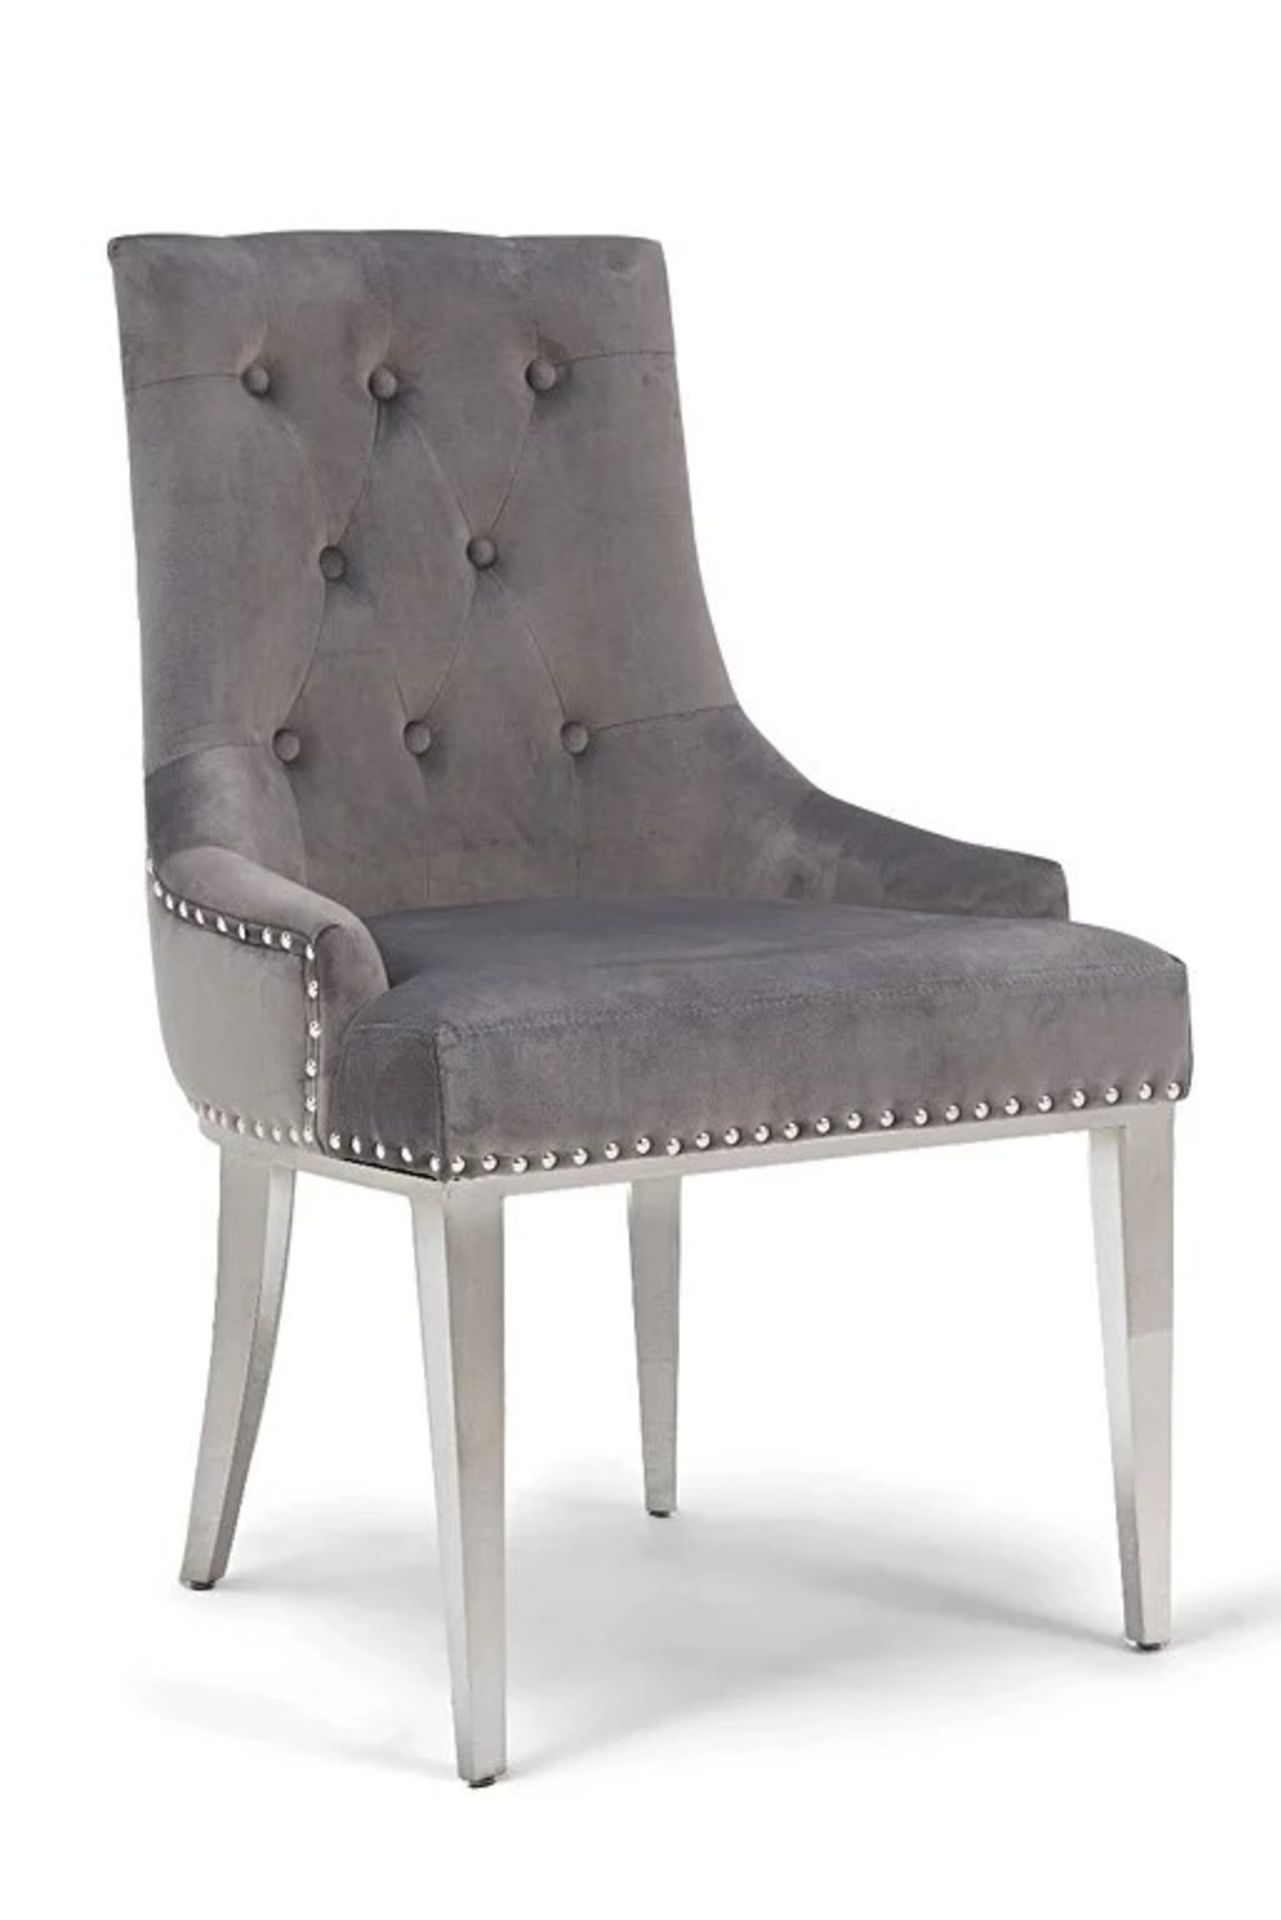 A set of 5 x Talia Dining Chair Updating the classic Chesterfield design, the Talia collection has a